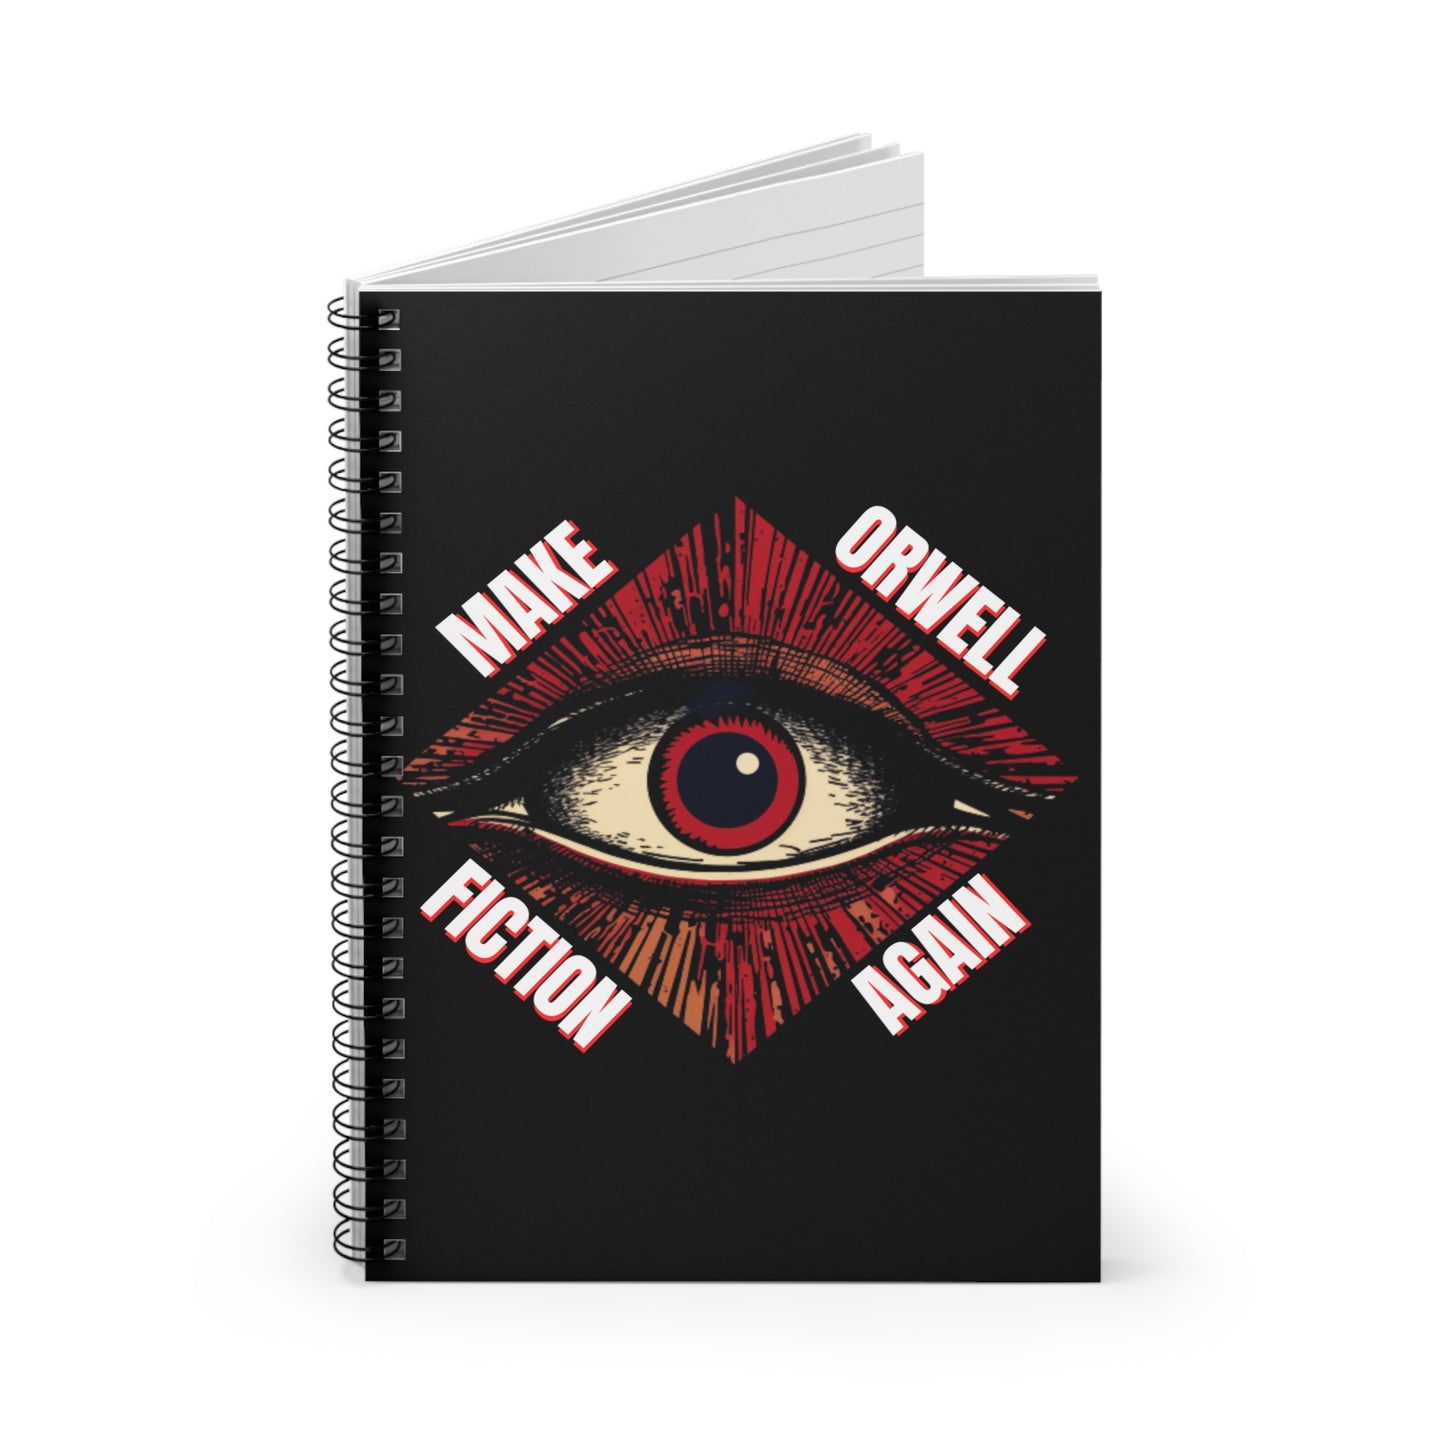 Make Orwell Fiction Again Spiral Notebook - Ruled Line